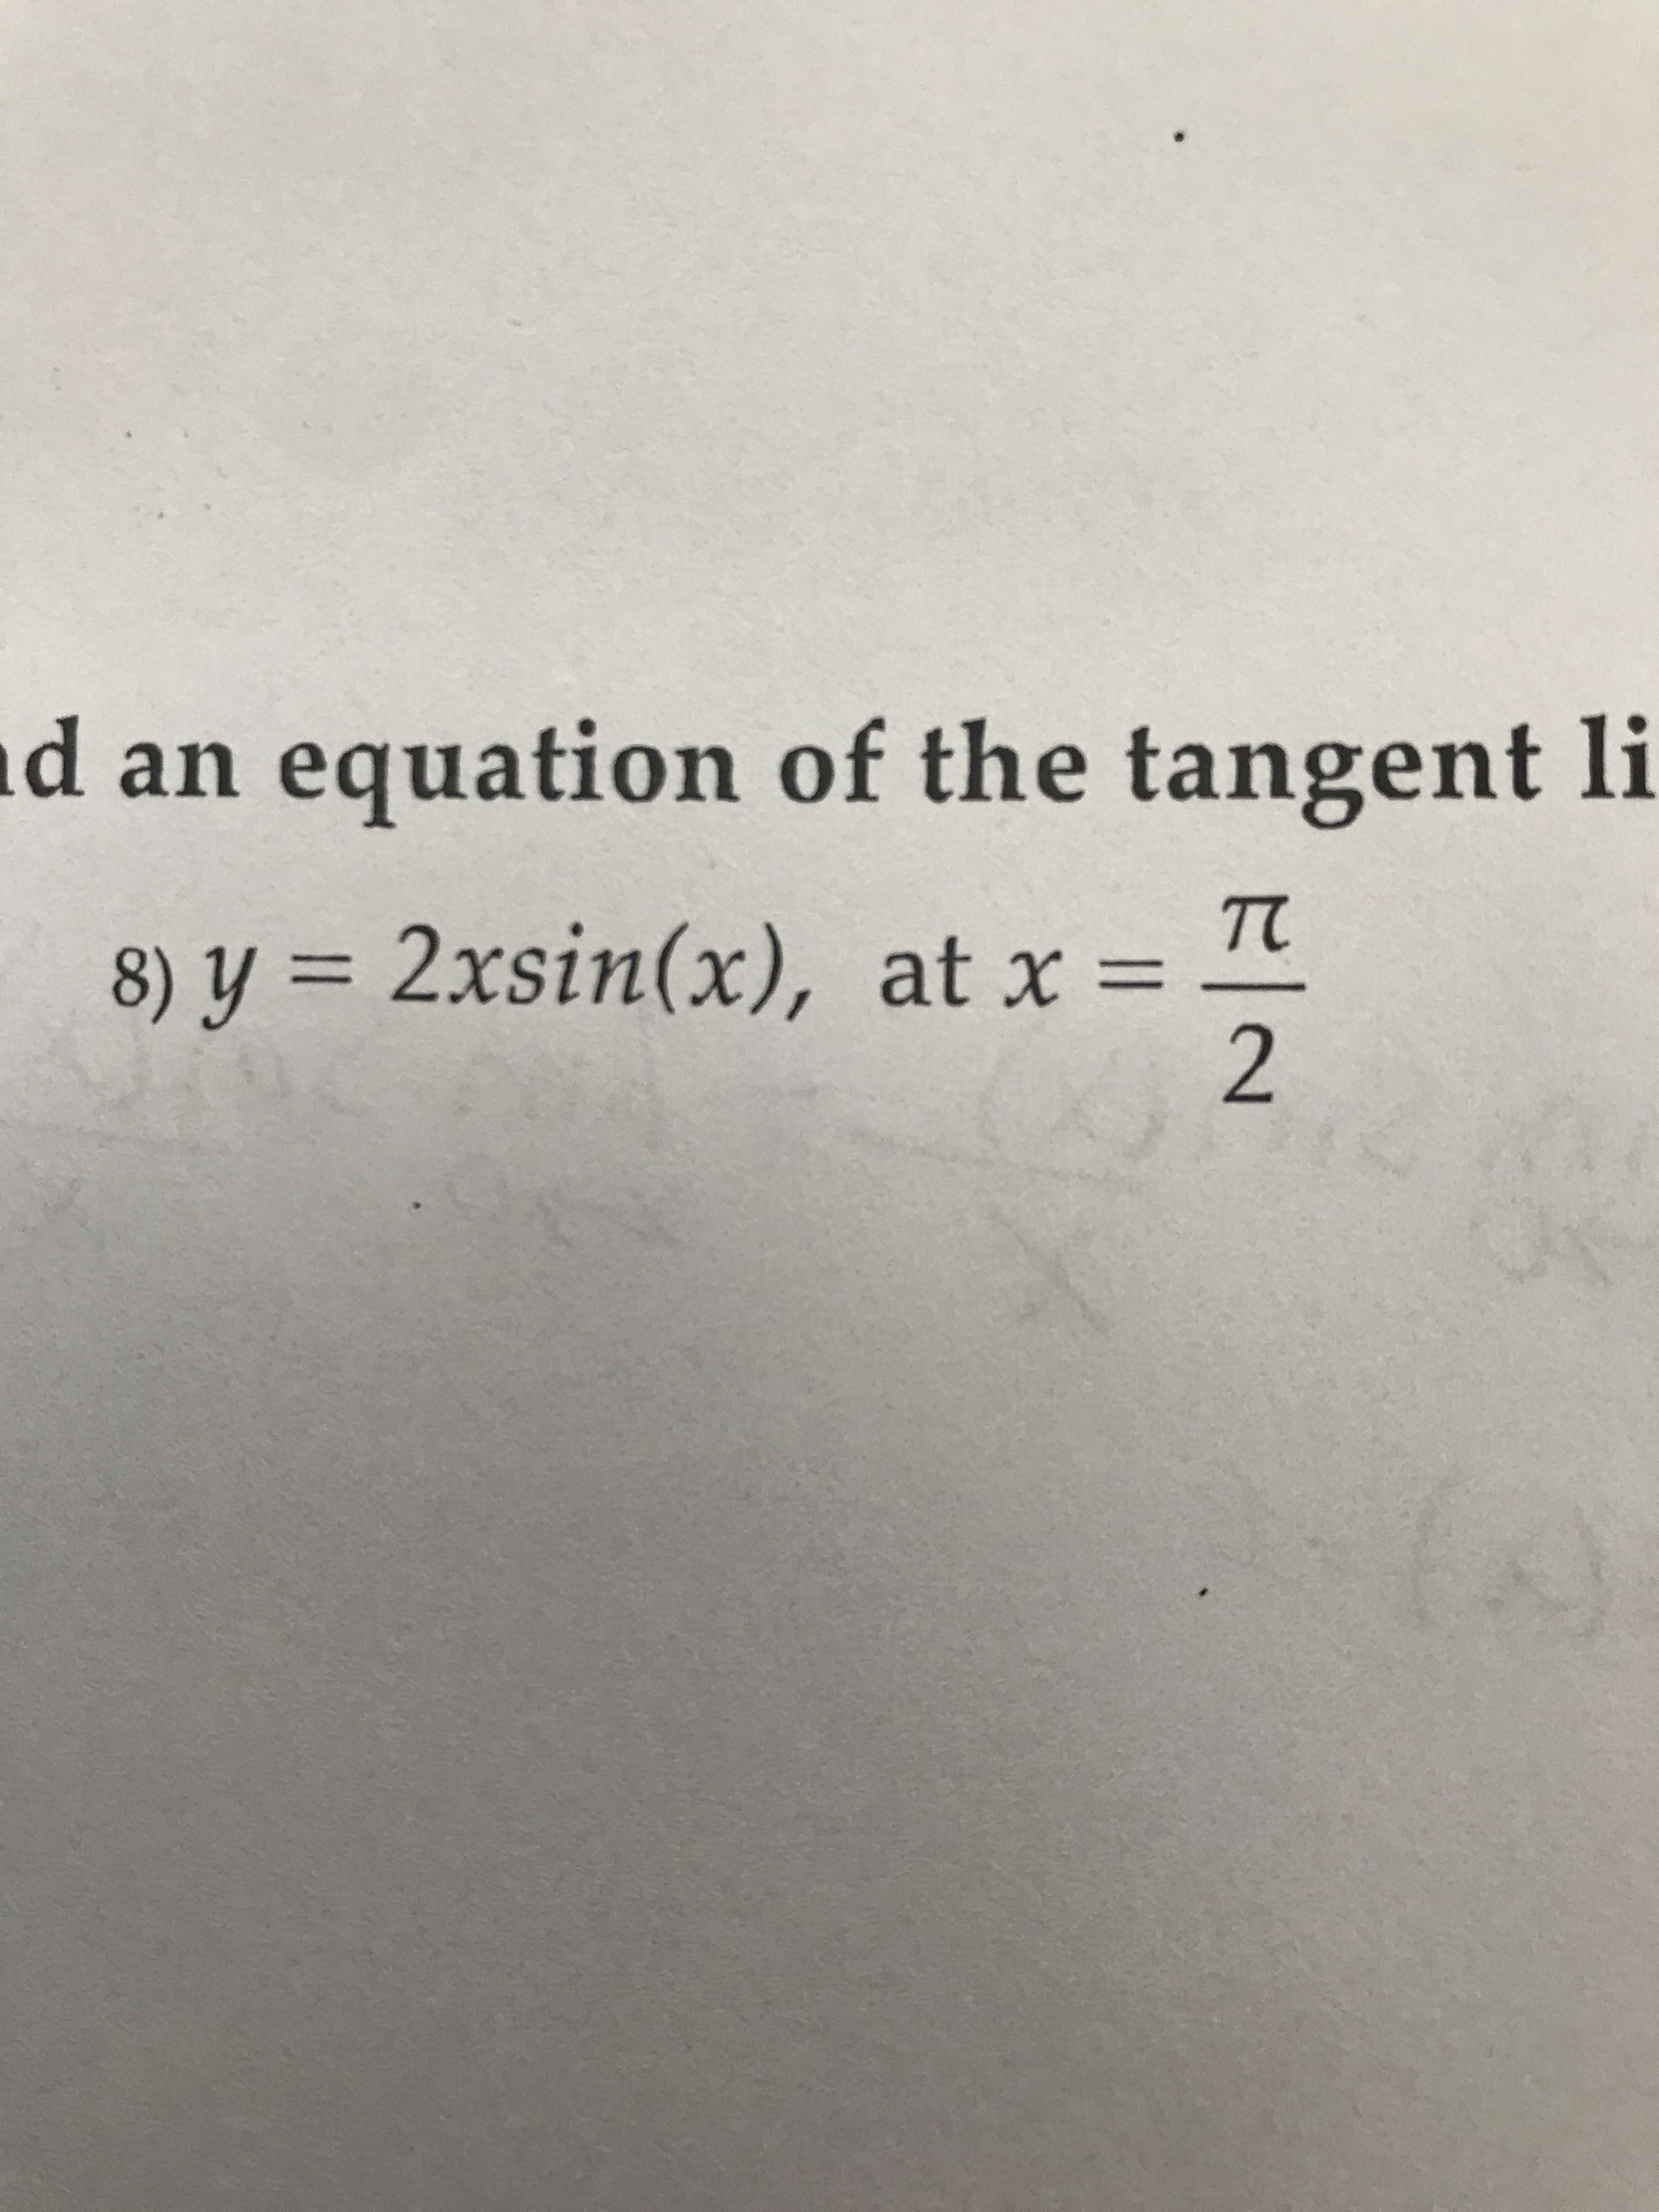 d an equation of the tangent li
8) y = 2xsin(x), at x =
E/2
